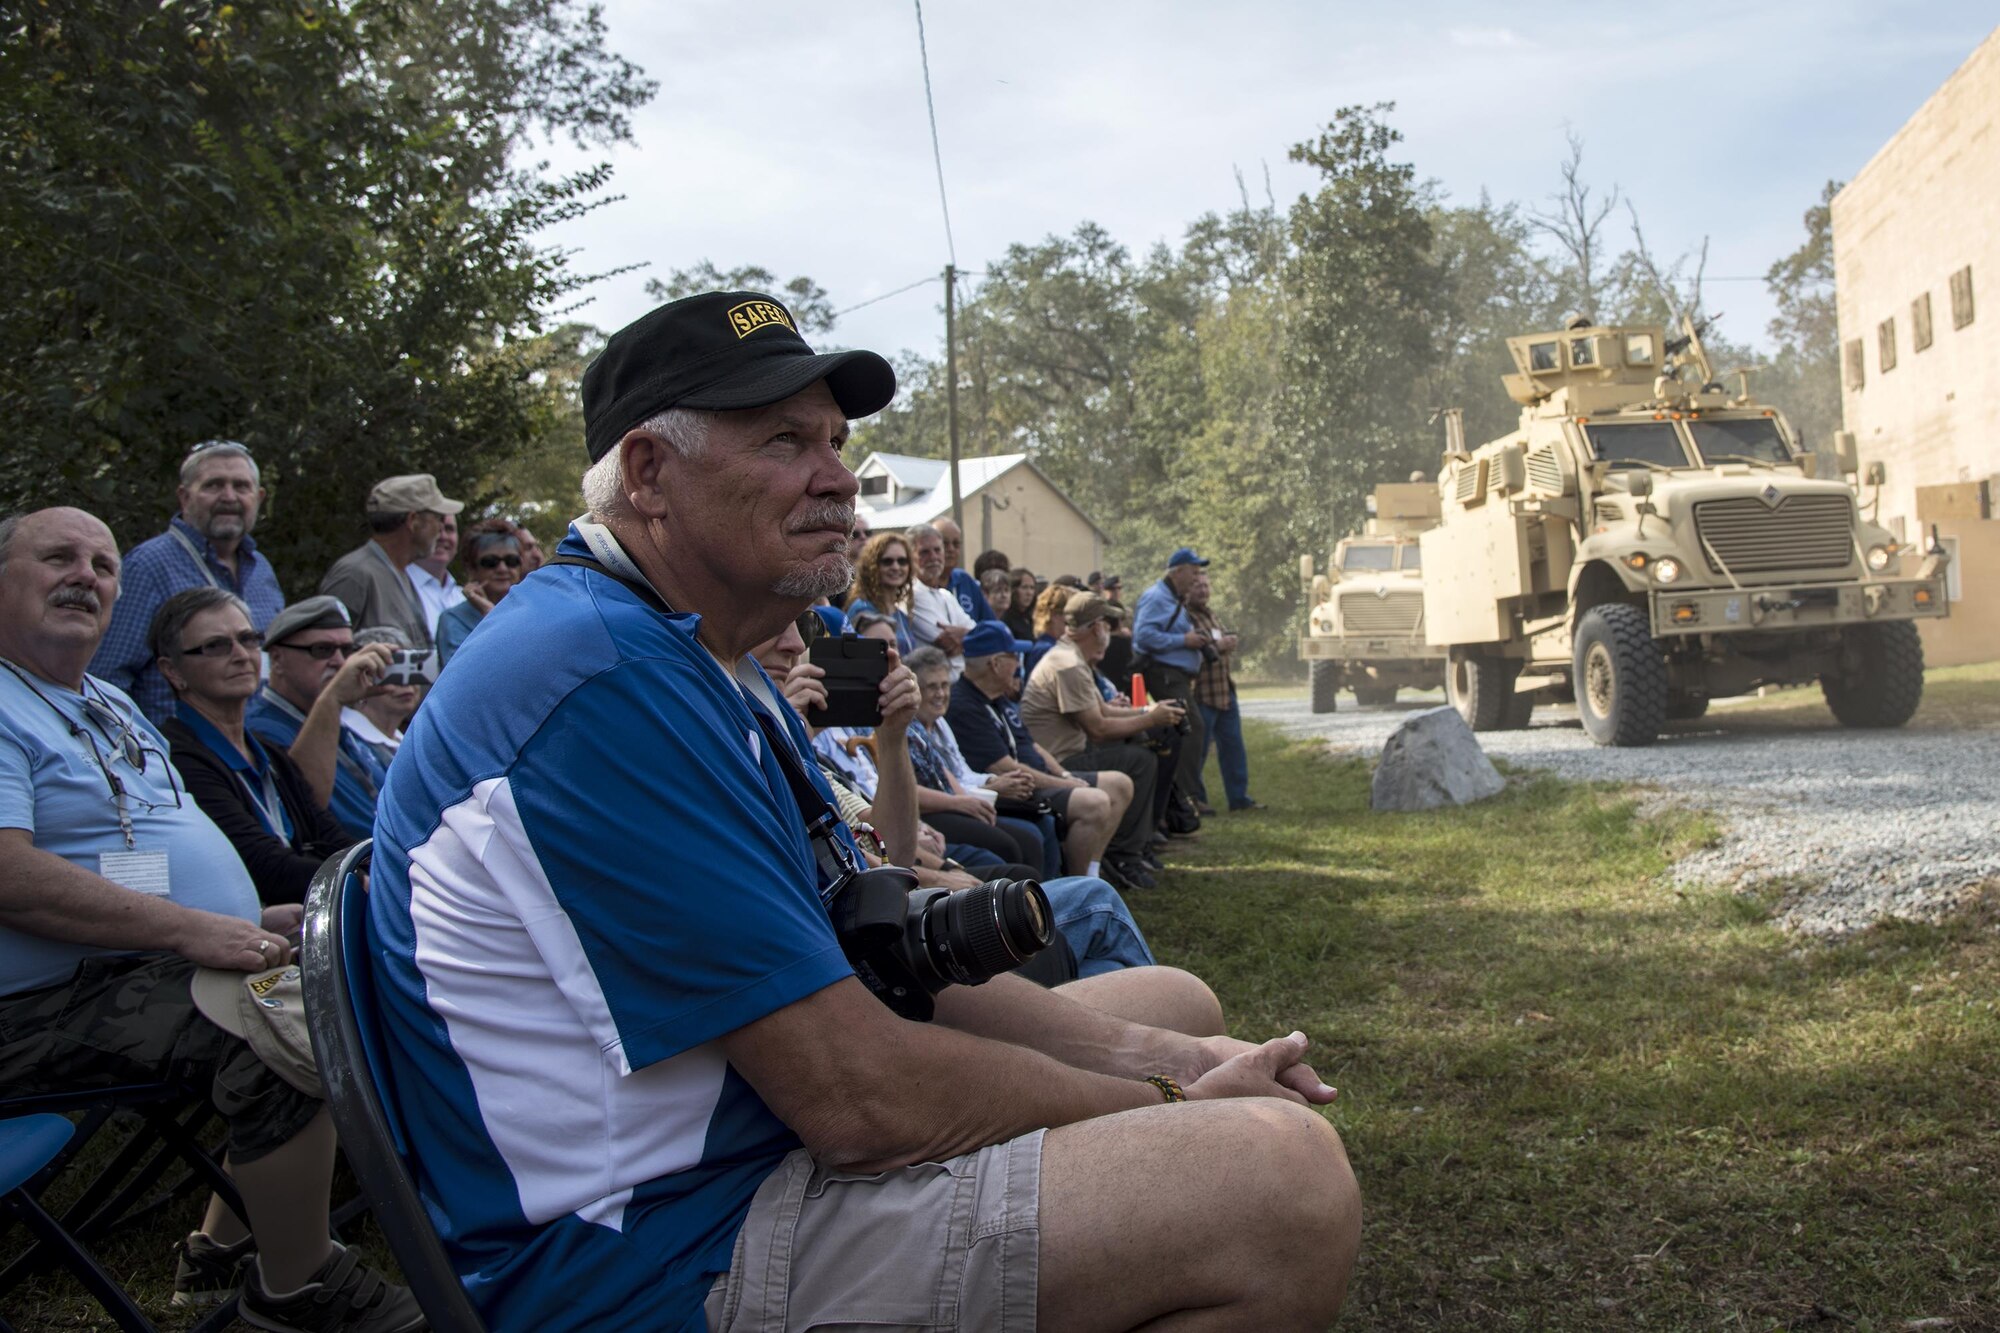 Members of the Safeside Association watch a demonstration by the 820th Base Defense Group, during a Safeside reunion Nov.8,2017, at Moody Air Force Base, Ga. Biennially, the Safeside Association holds a reunion to interact with and honor their past and present comrades from the 820th Base Defense Group. (U.S. Air Force photo by Airman Eugene Oliver)